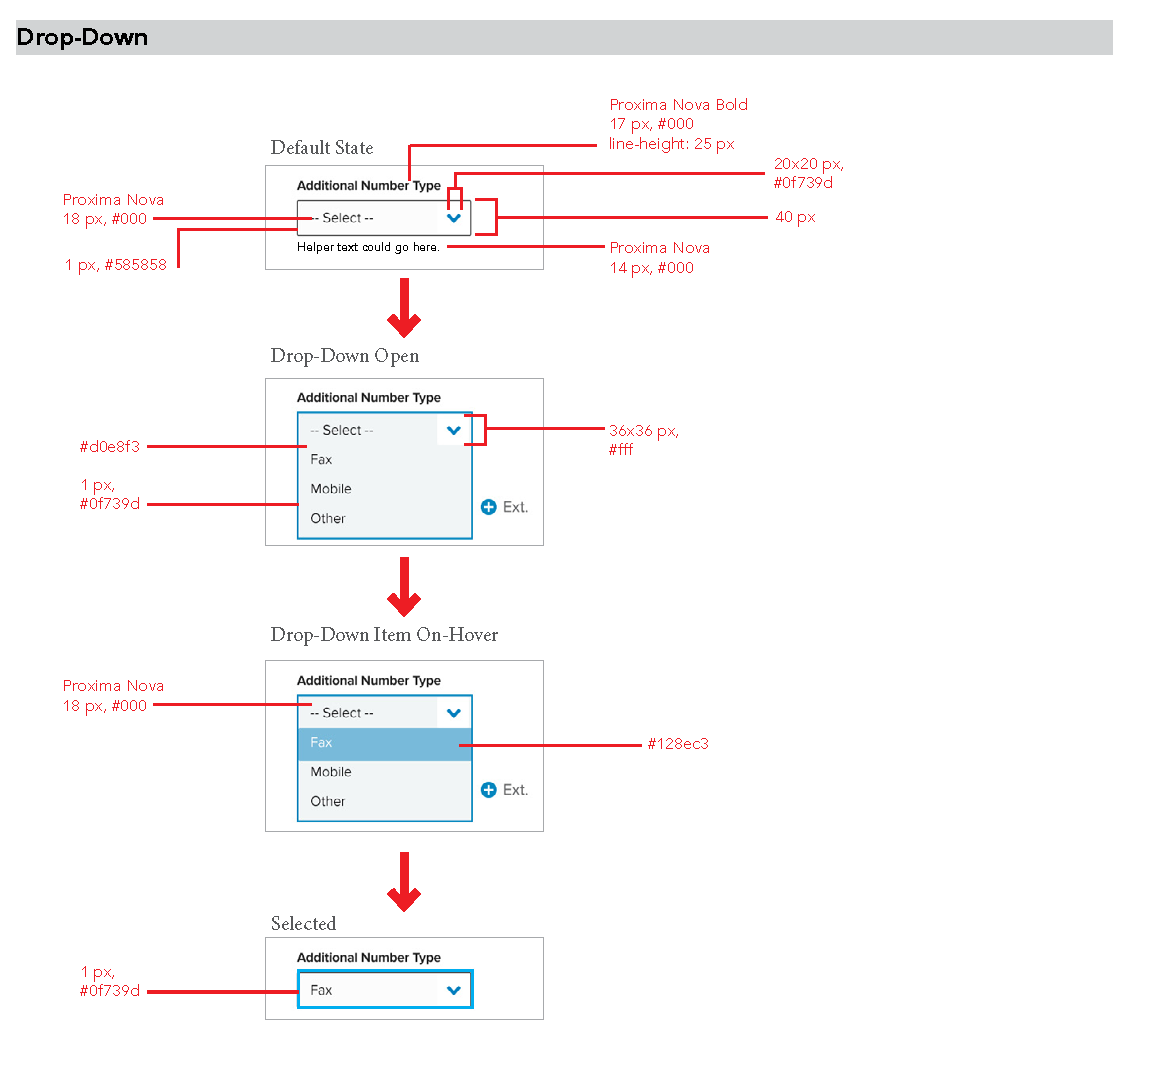 TJC_NYBE_UXDesign_Batch1and2_DesignSpec_v02.0_Page_19-2.png